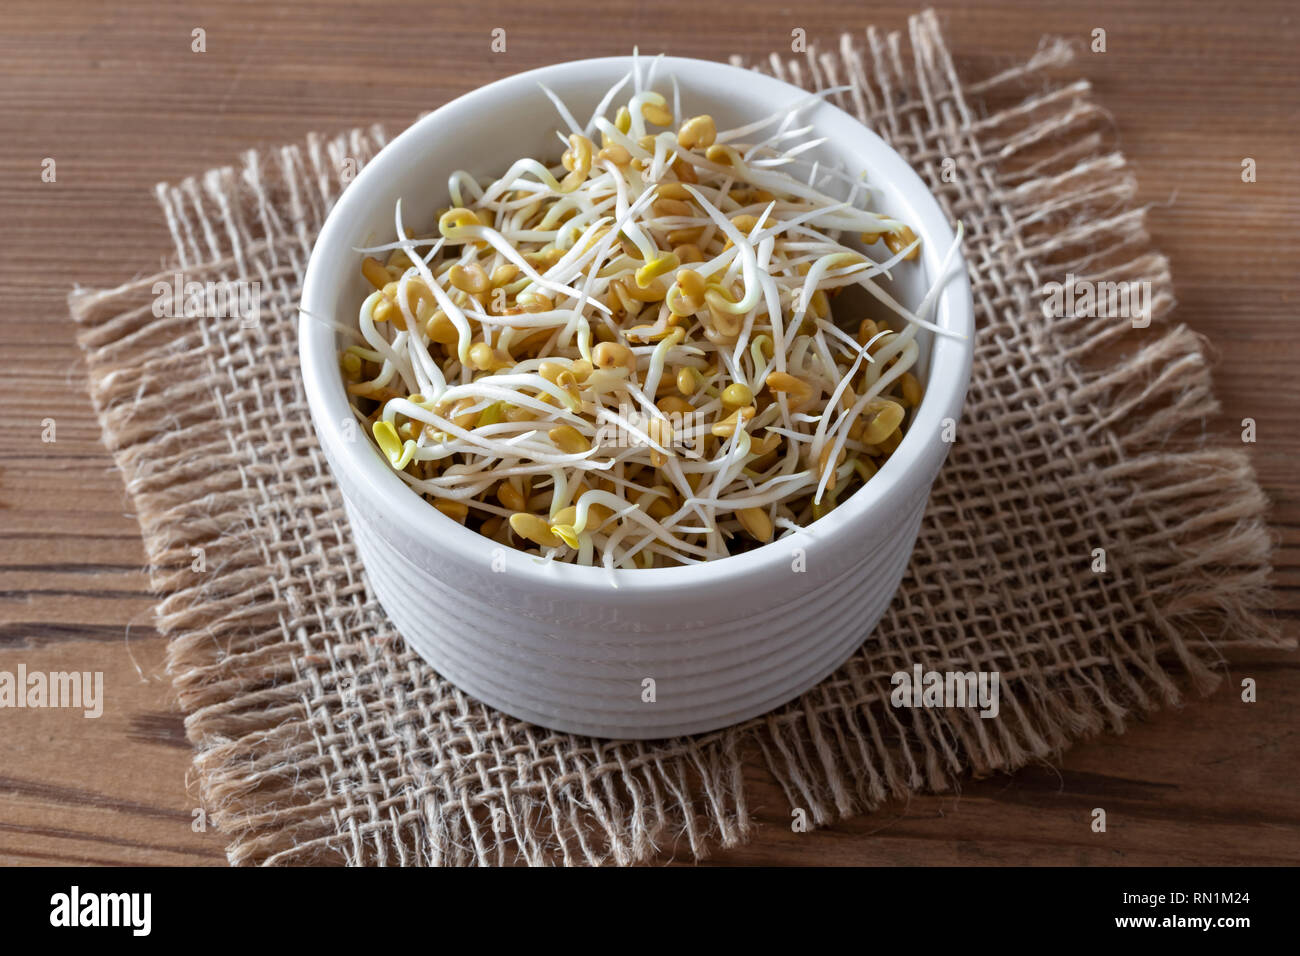 Sprouted fenugreek seeds in a bowl Stock Photo